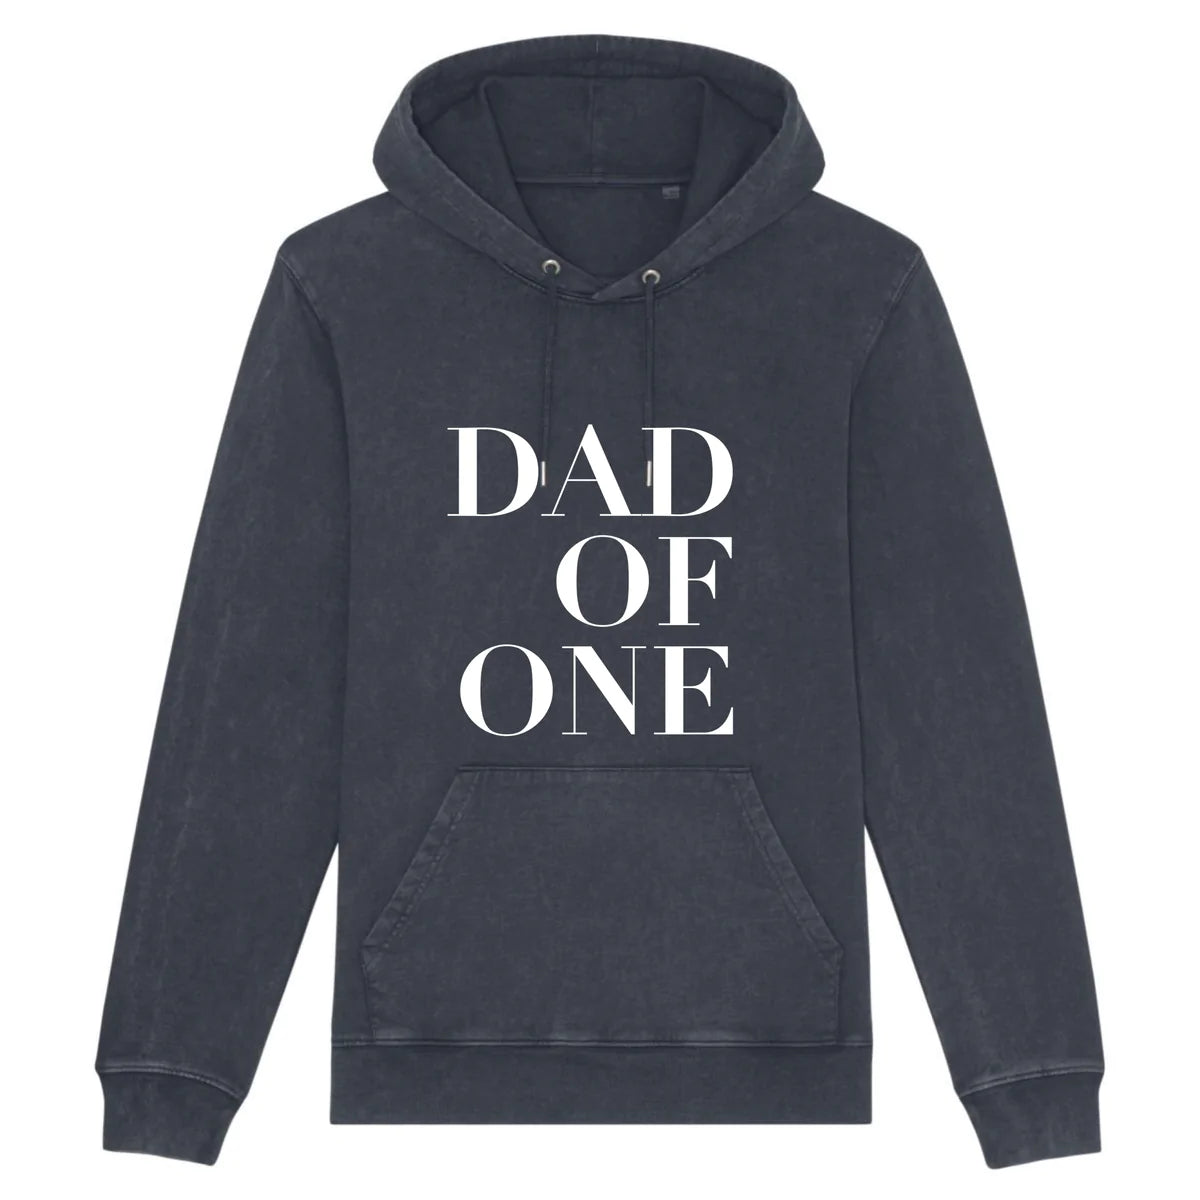 A DAD OF ONE ANTHRACITE GRAY HOODIE